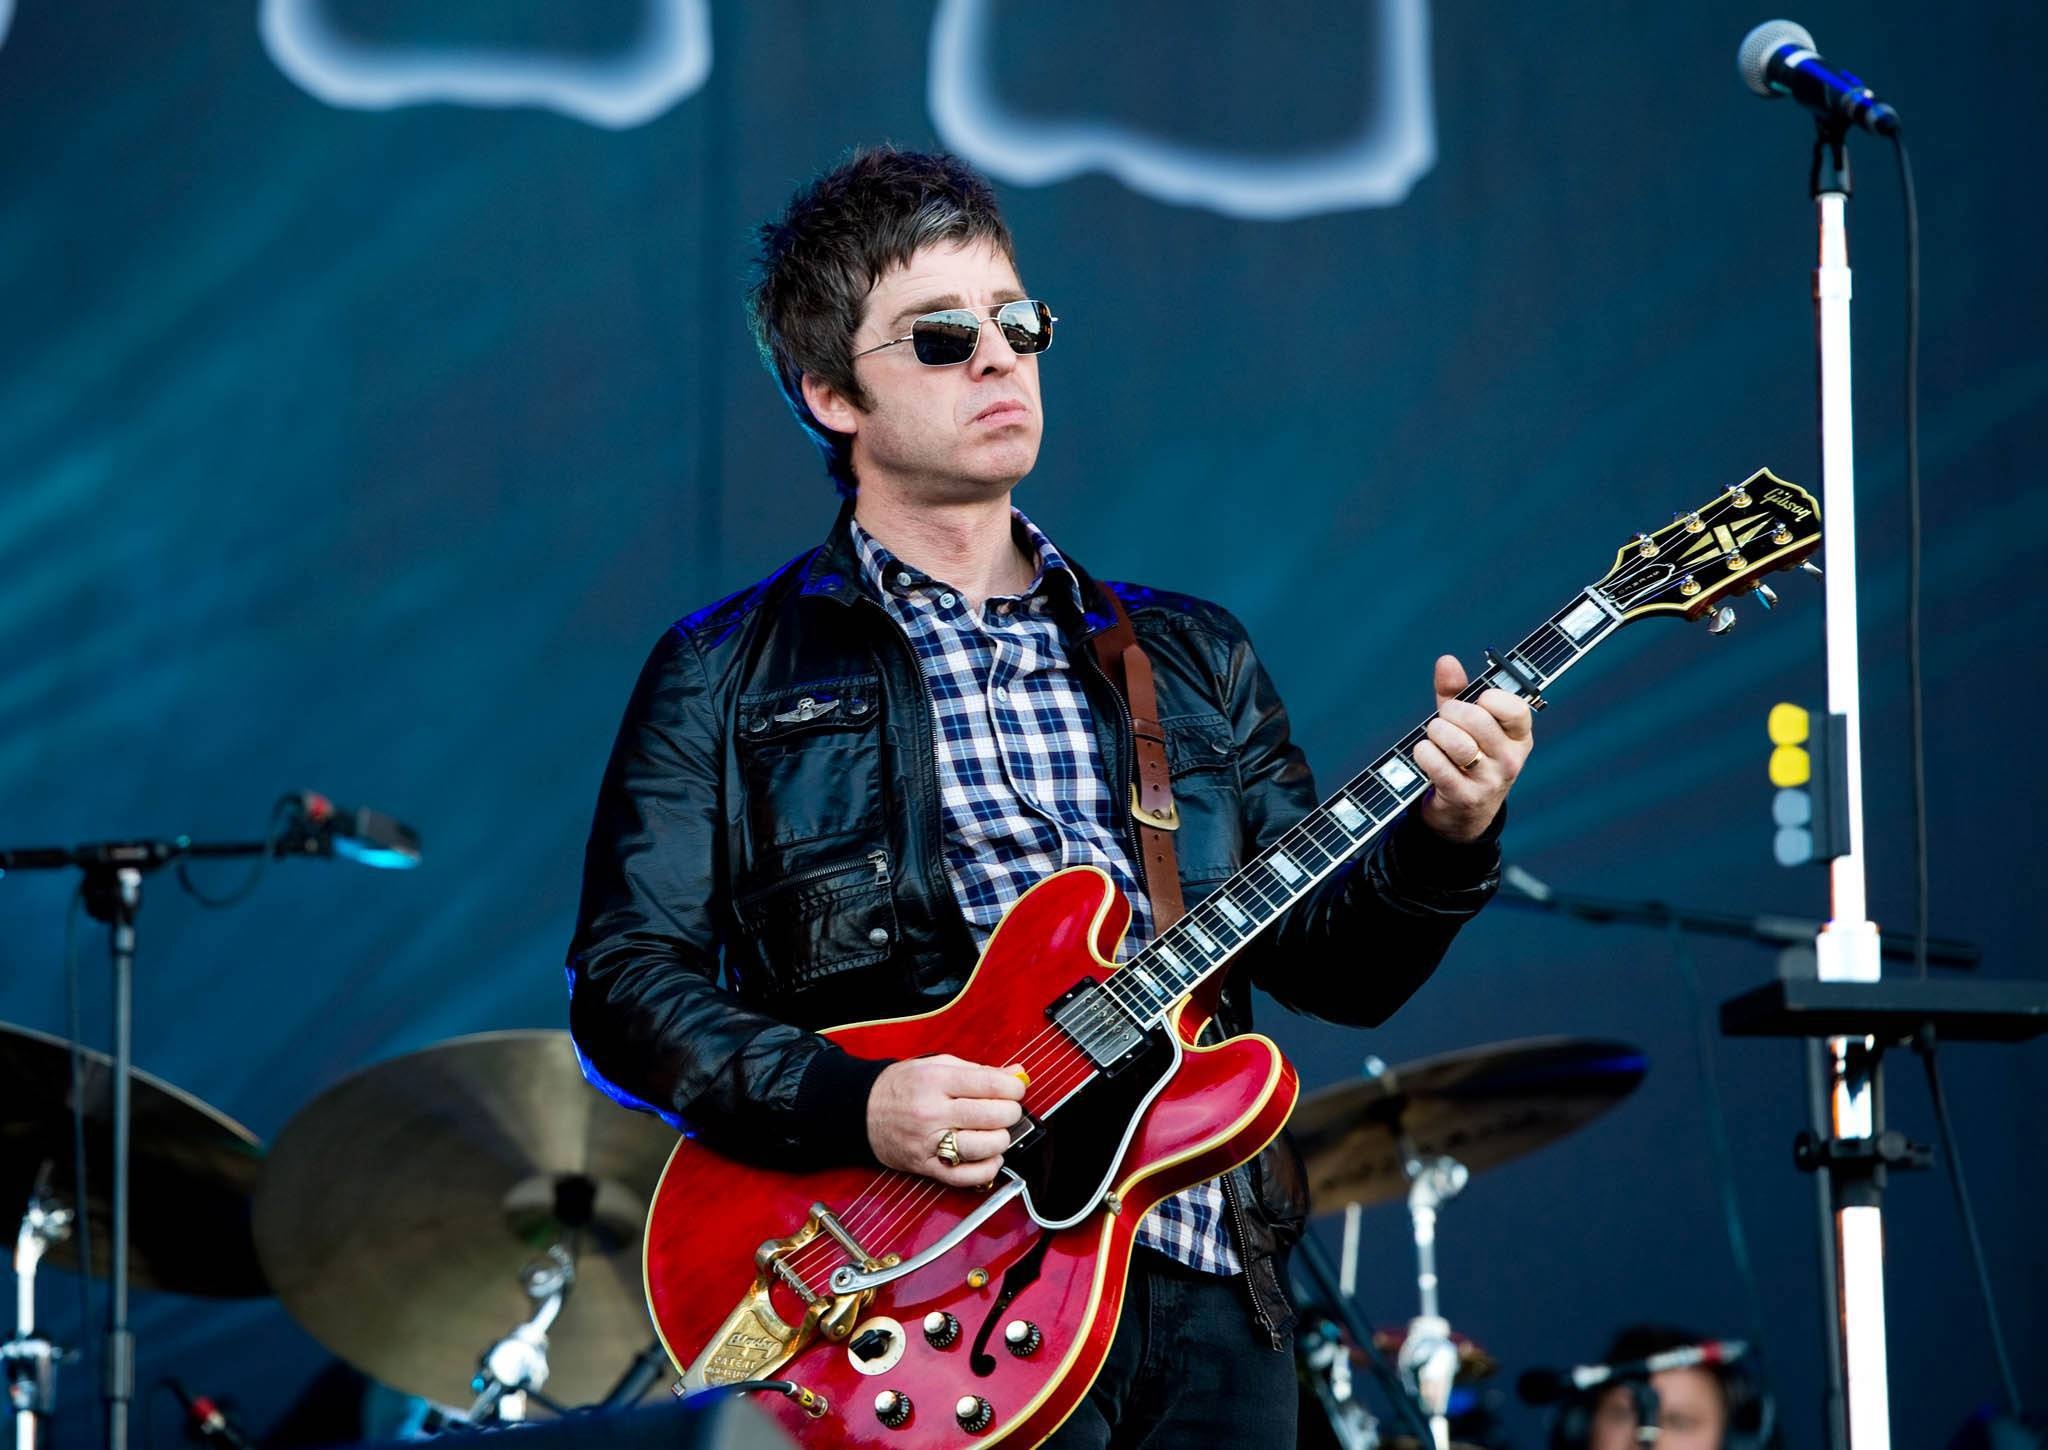 Noel Gallagher Wallpapers - Top Free Noel Gallagher Backgrounds 2050x1450